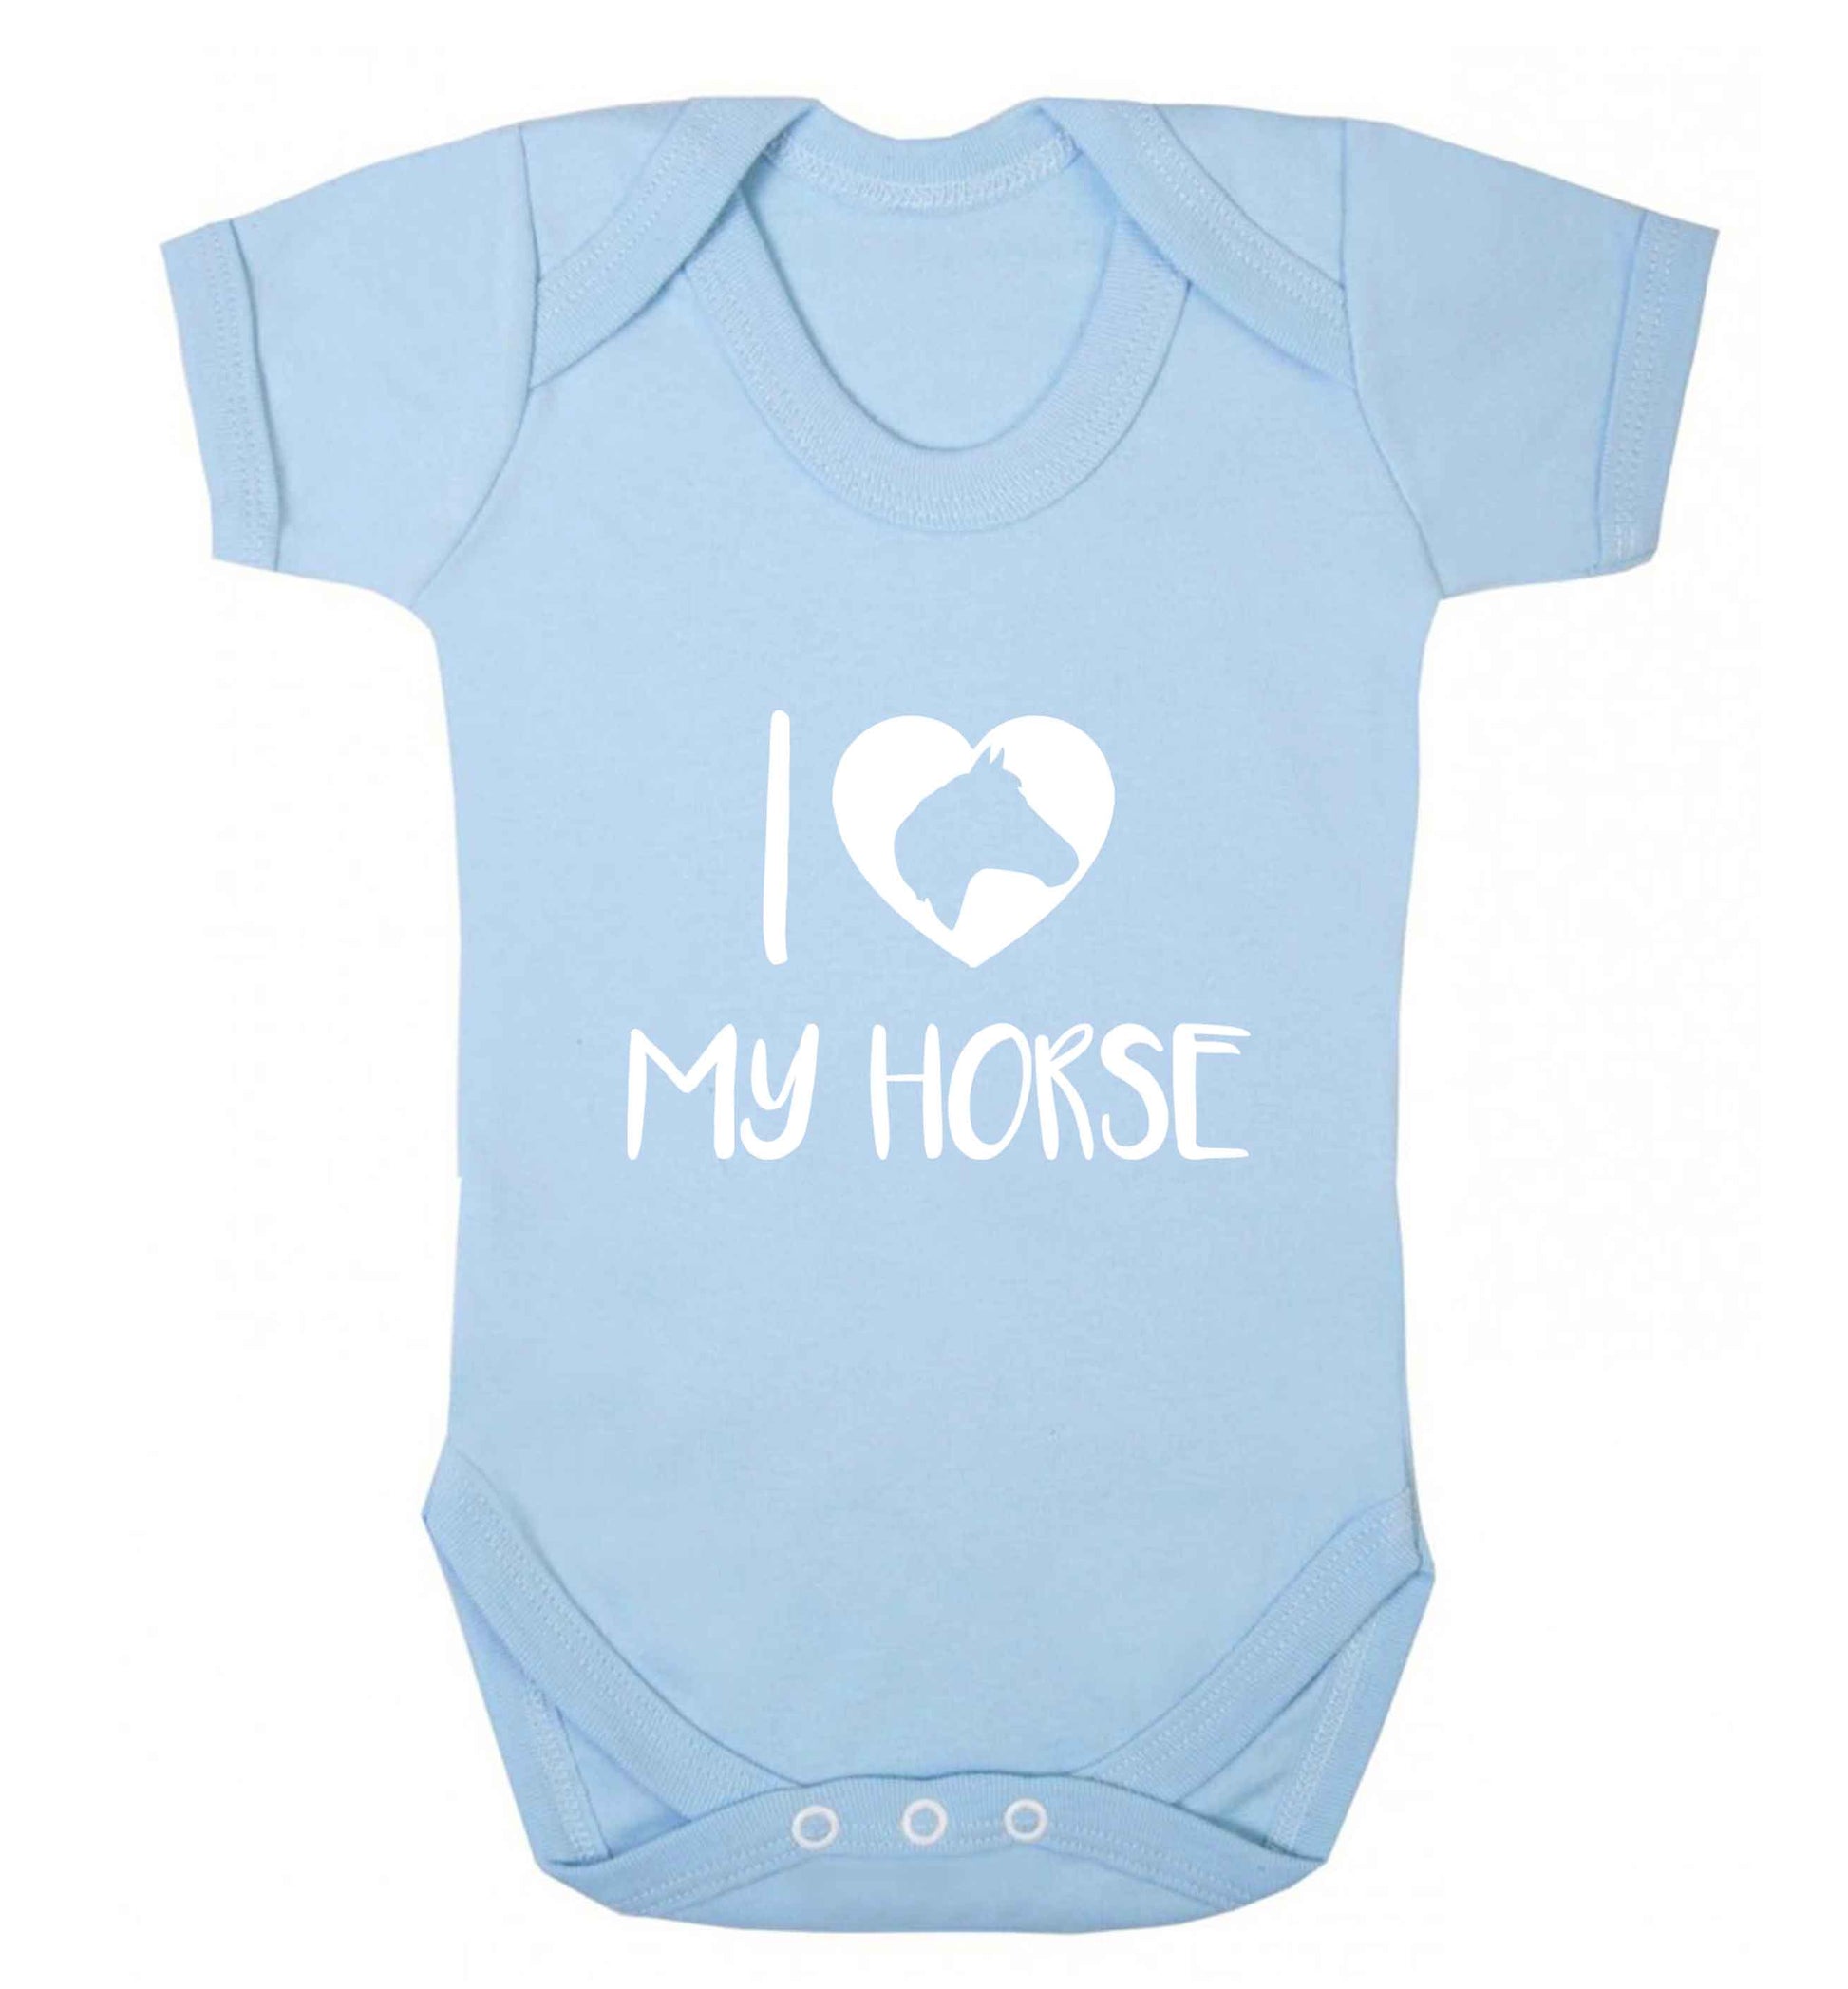 I love my horse baby vest pale blue 18-24 months